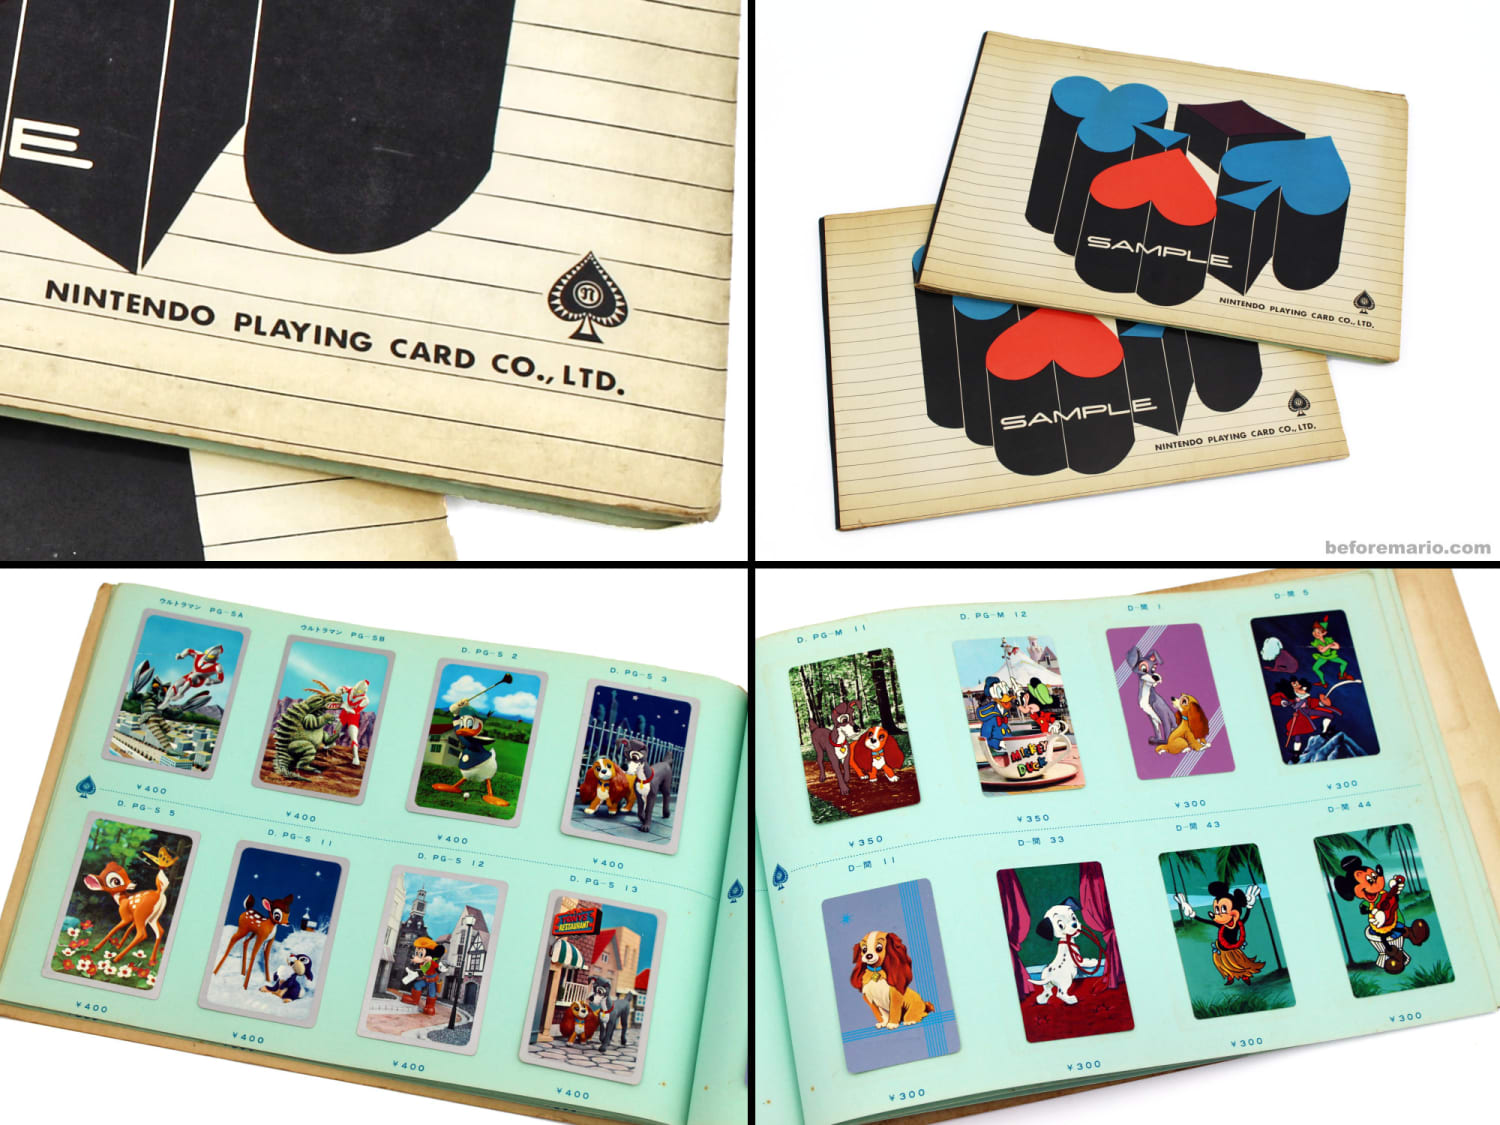 Check out this wonderful 50+ year old sample book with over one hundred of Nintendo's playing cards from the 1960s, including disney and ultraman designs.